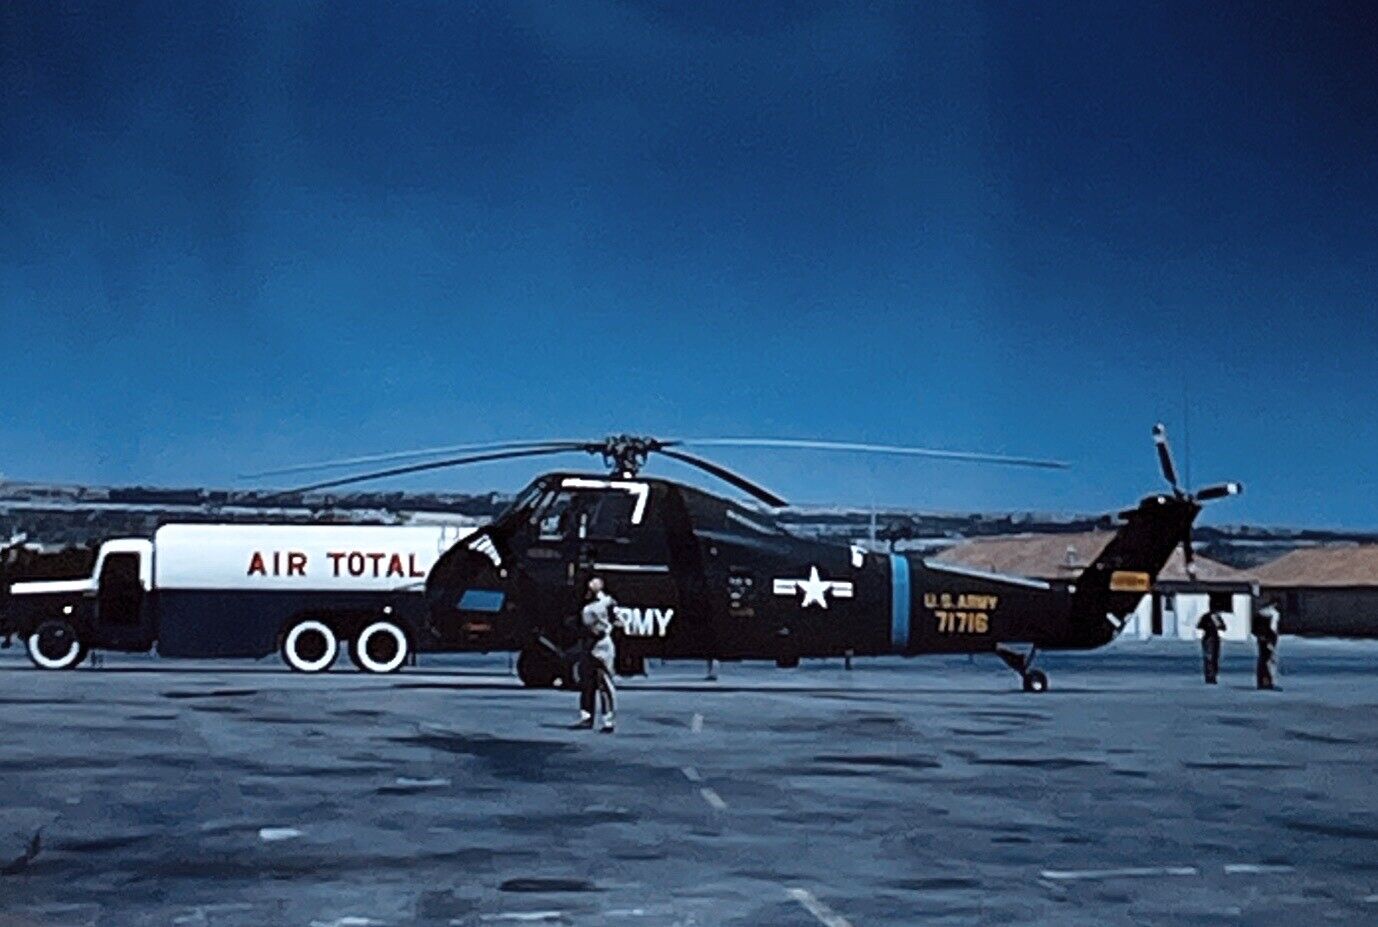 Original Kodachrome 35mm Slide US Army Helicopter 71716 Air Total Truck Soldier